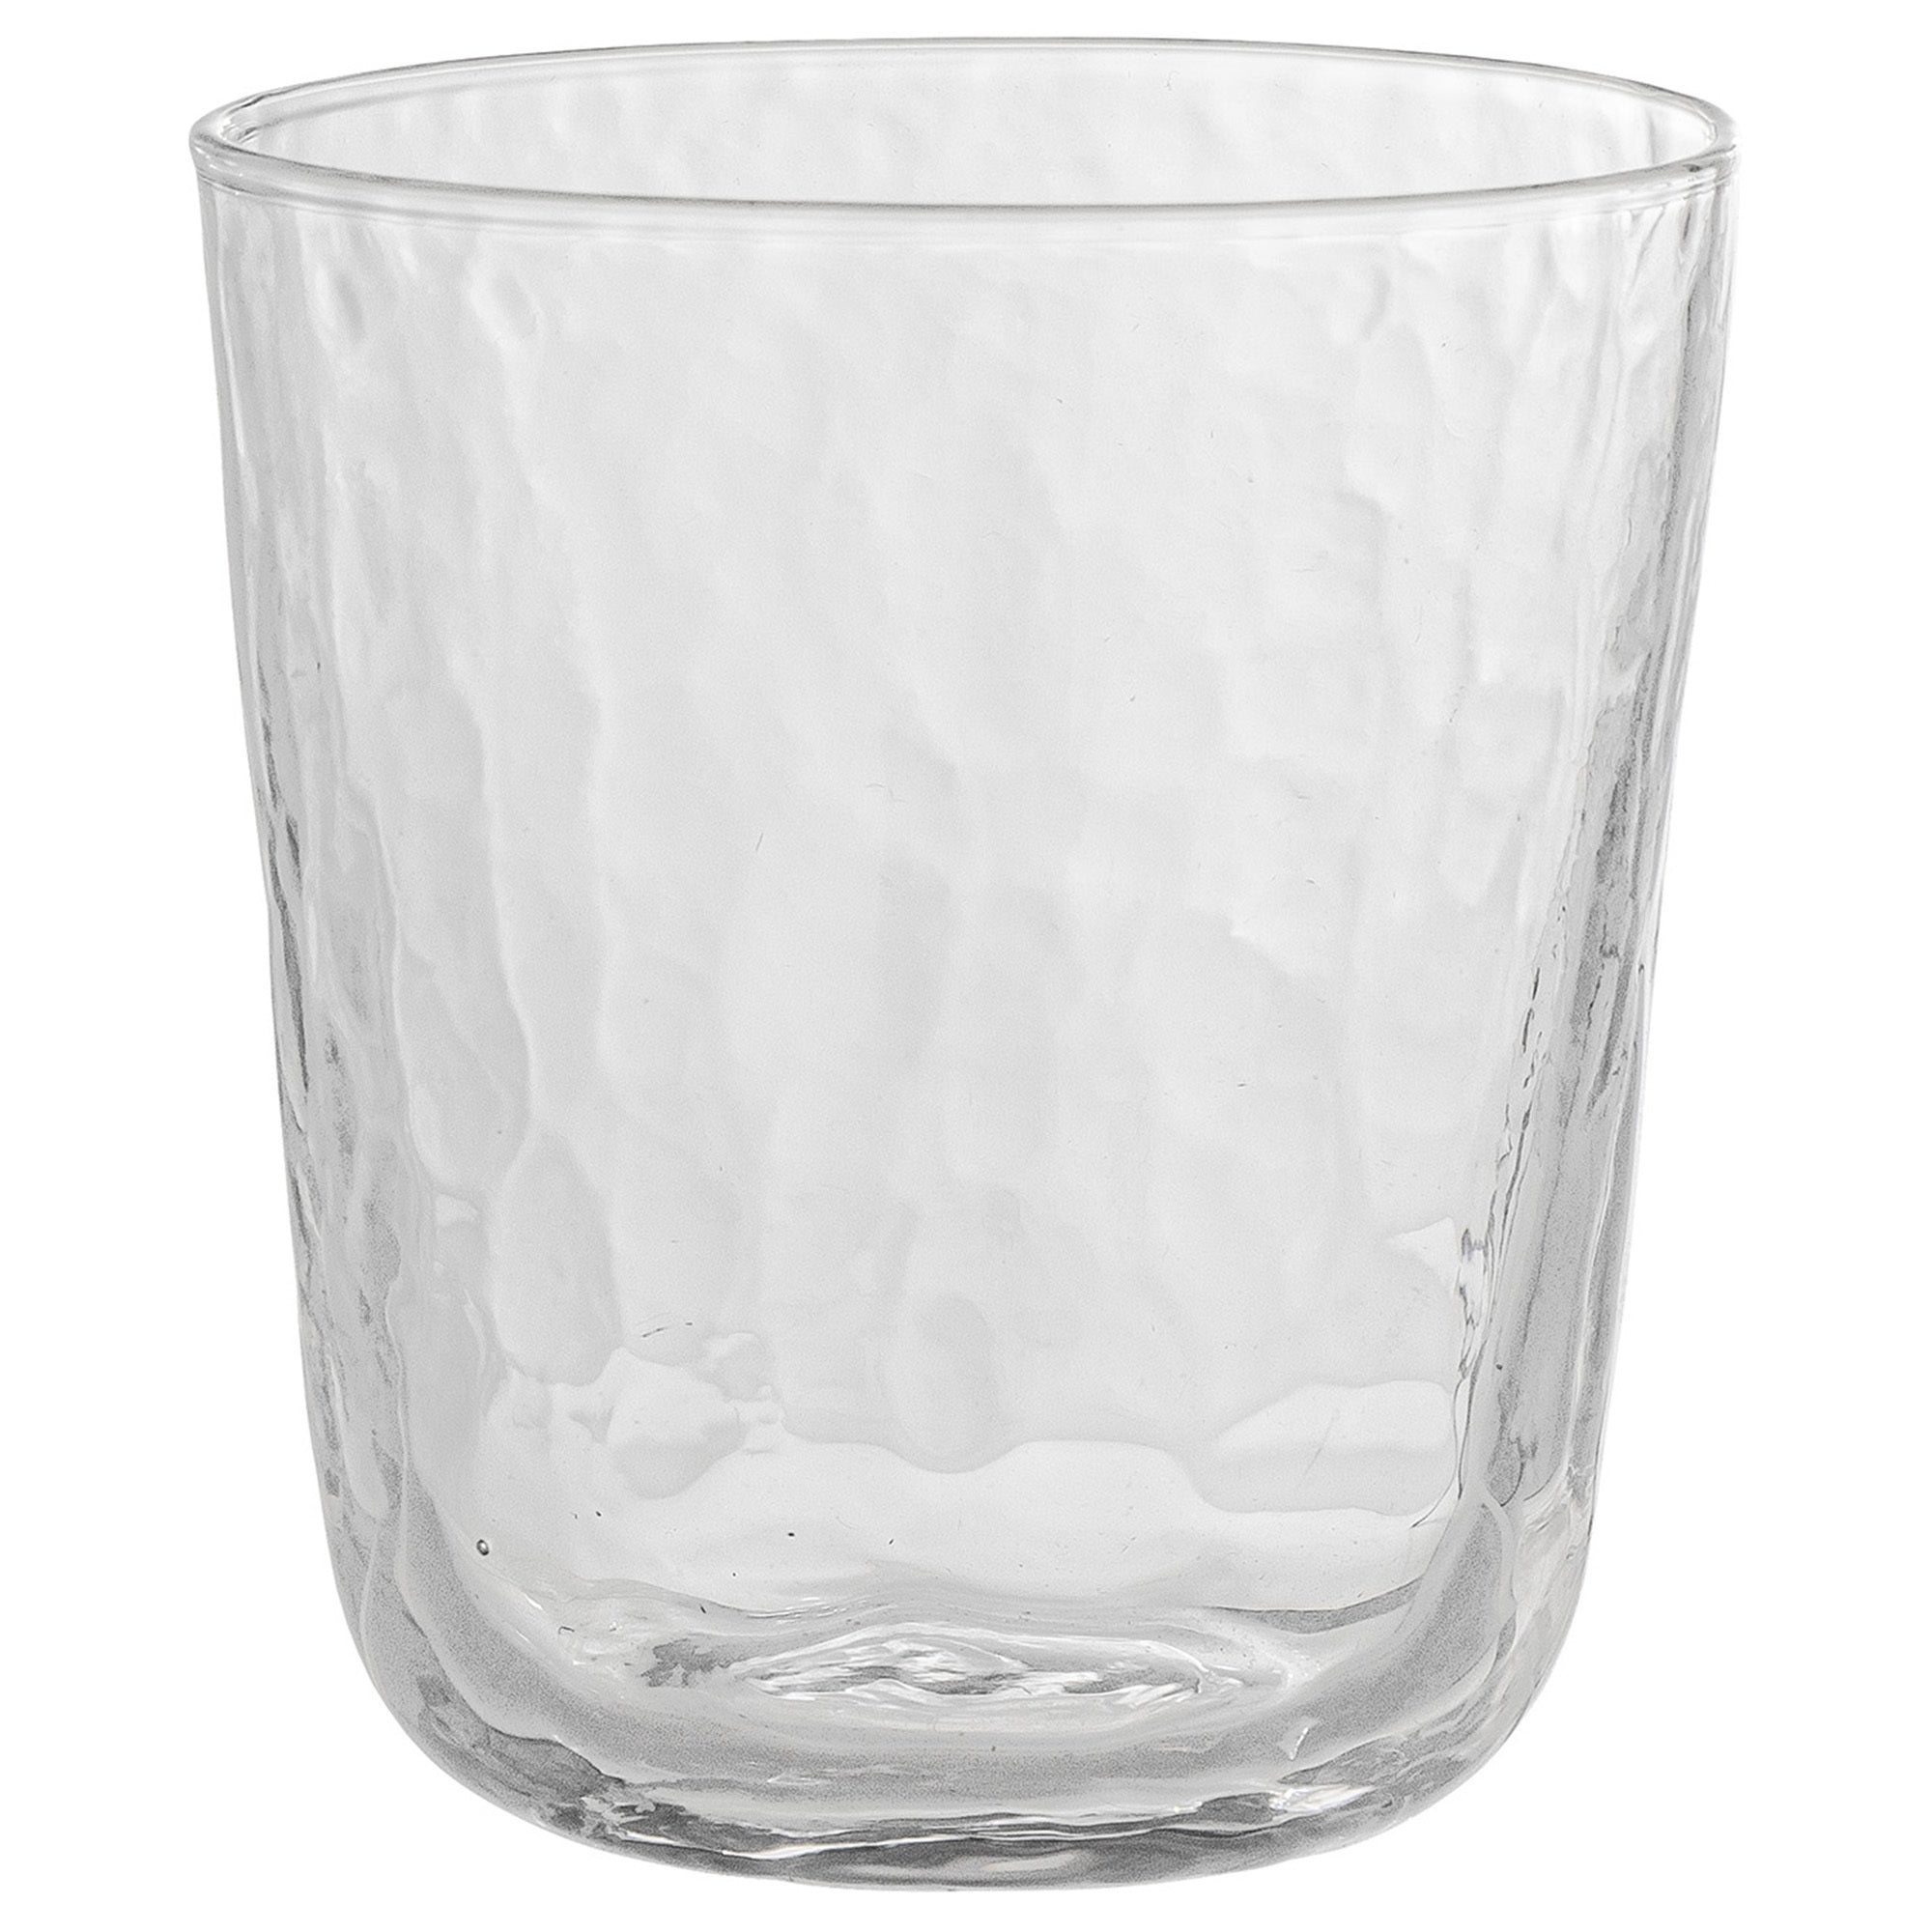 Asali Drinking Glass Set of 4 | Clear